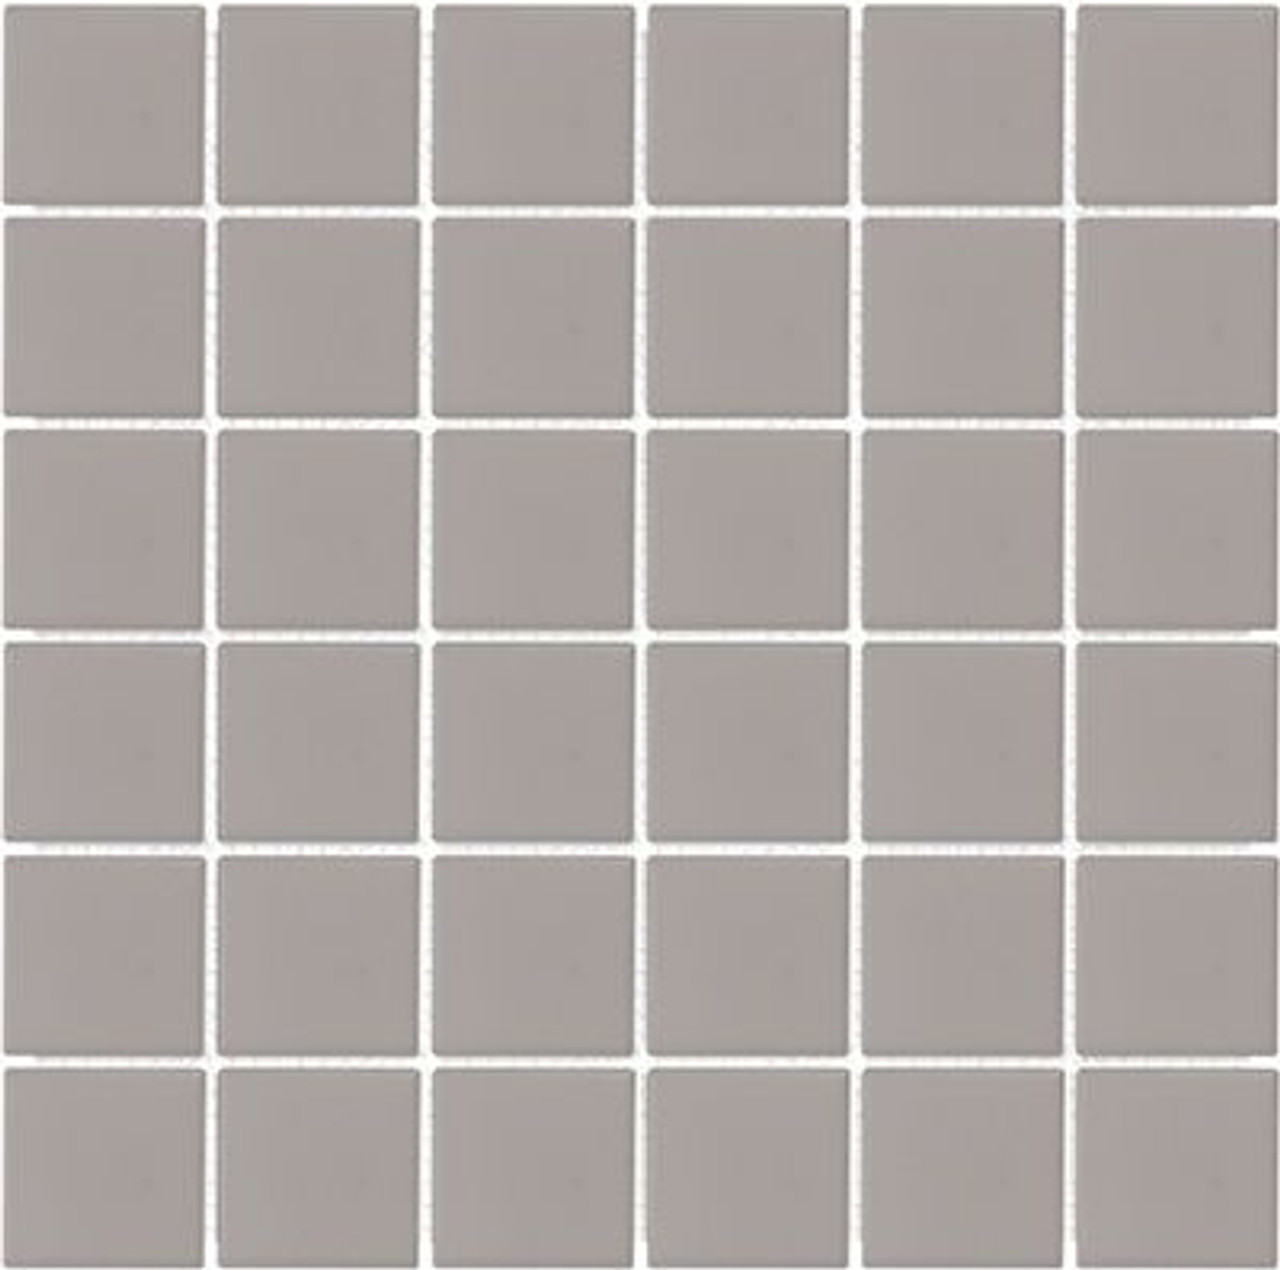 2x2 Soho Taupe Matte Mosaic Tile | Sold by the Tile